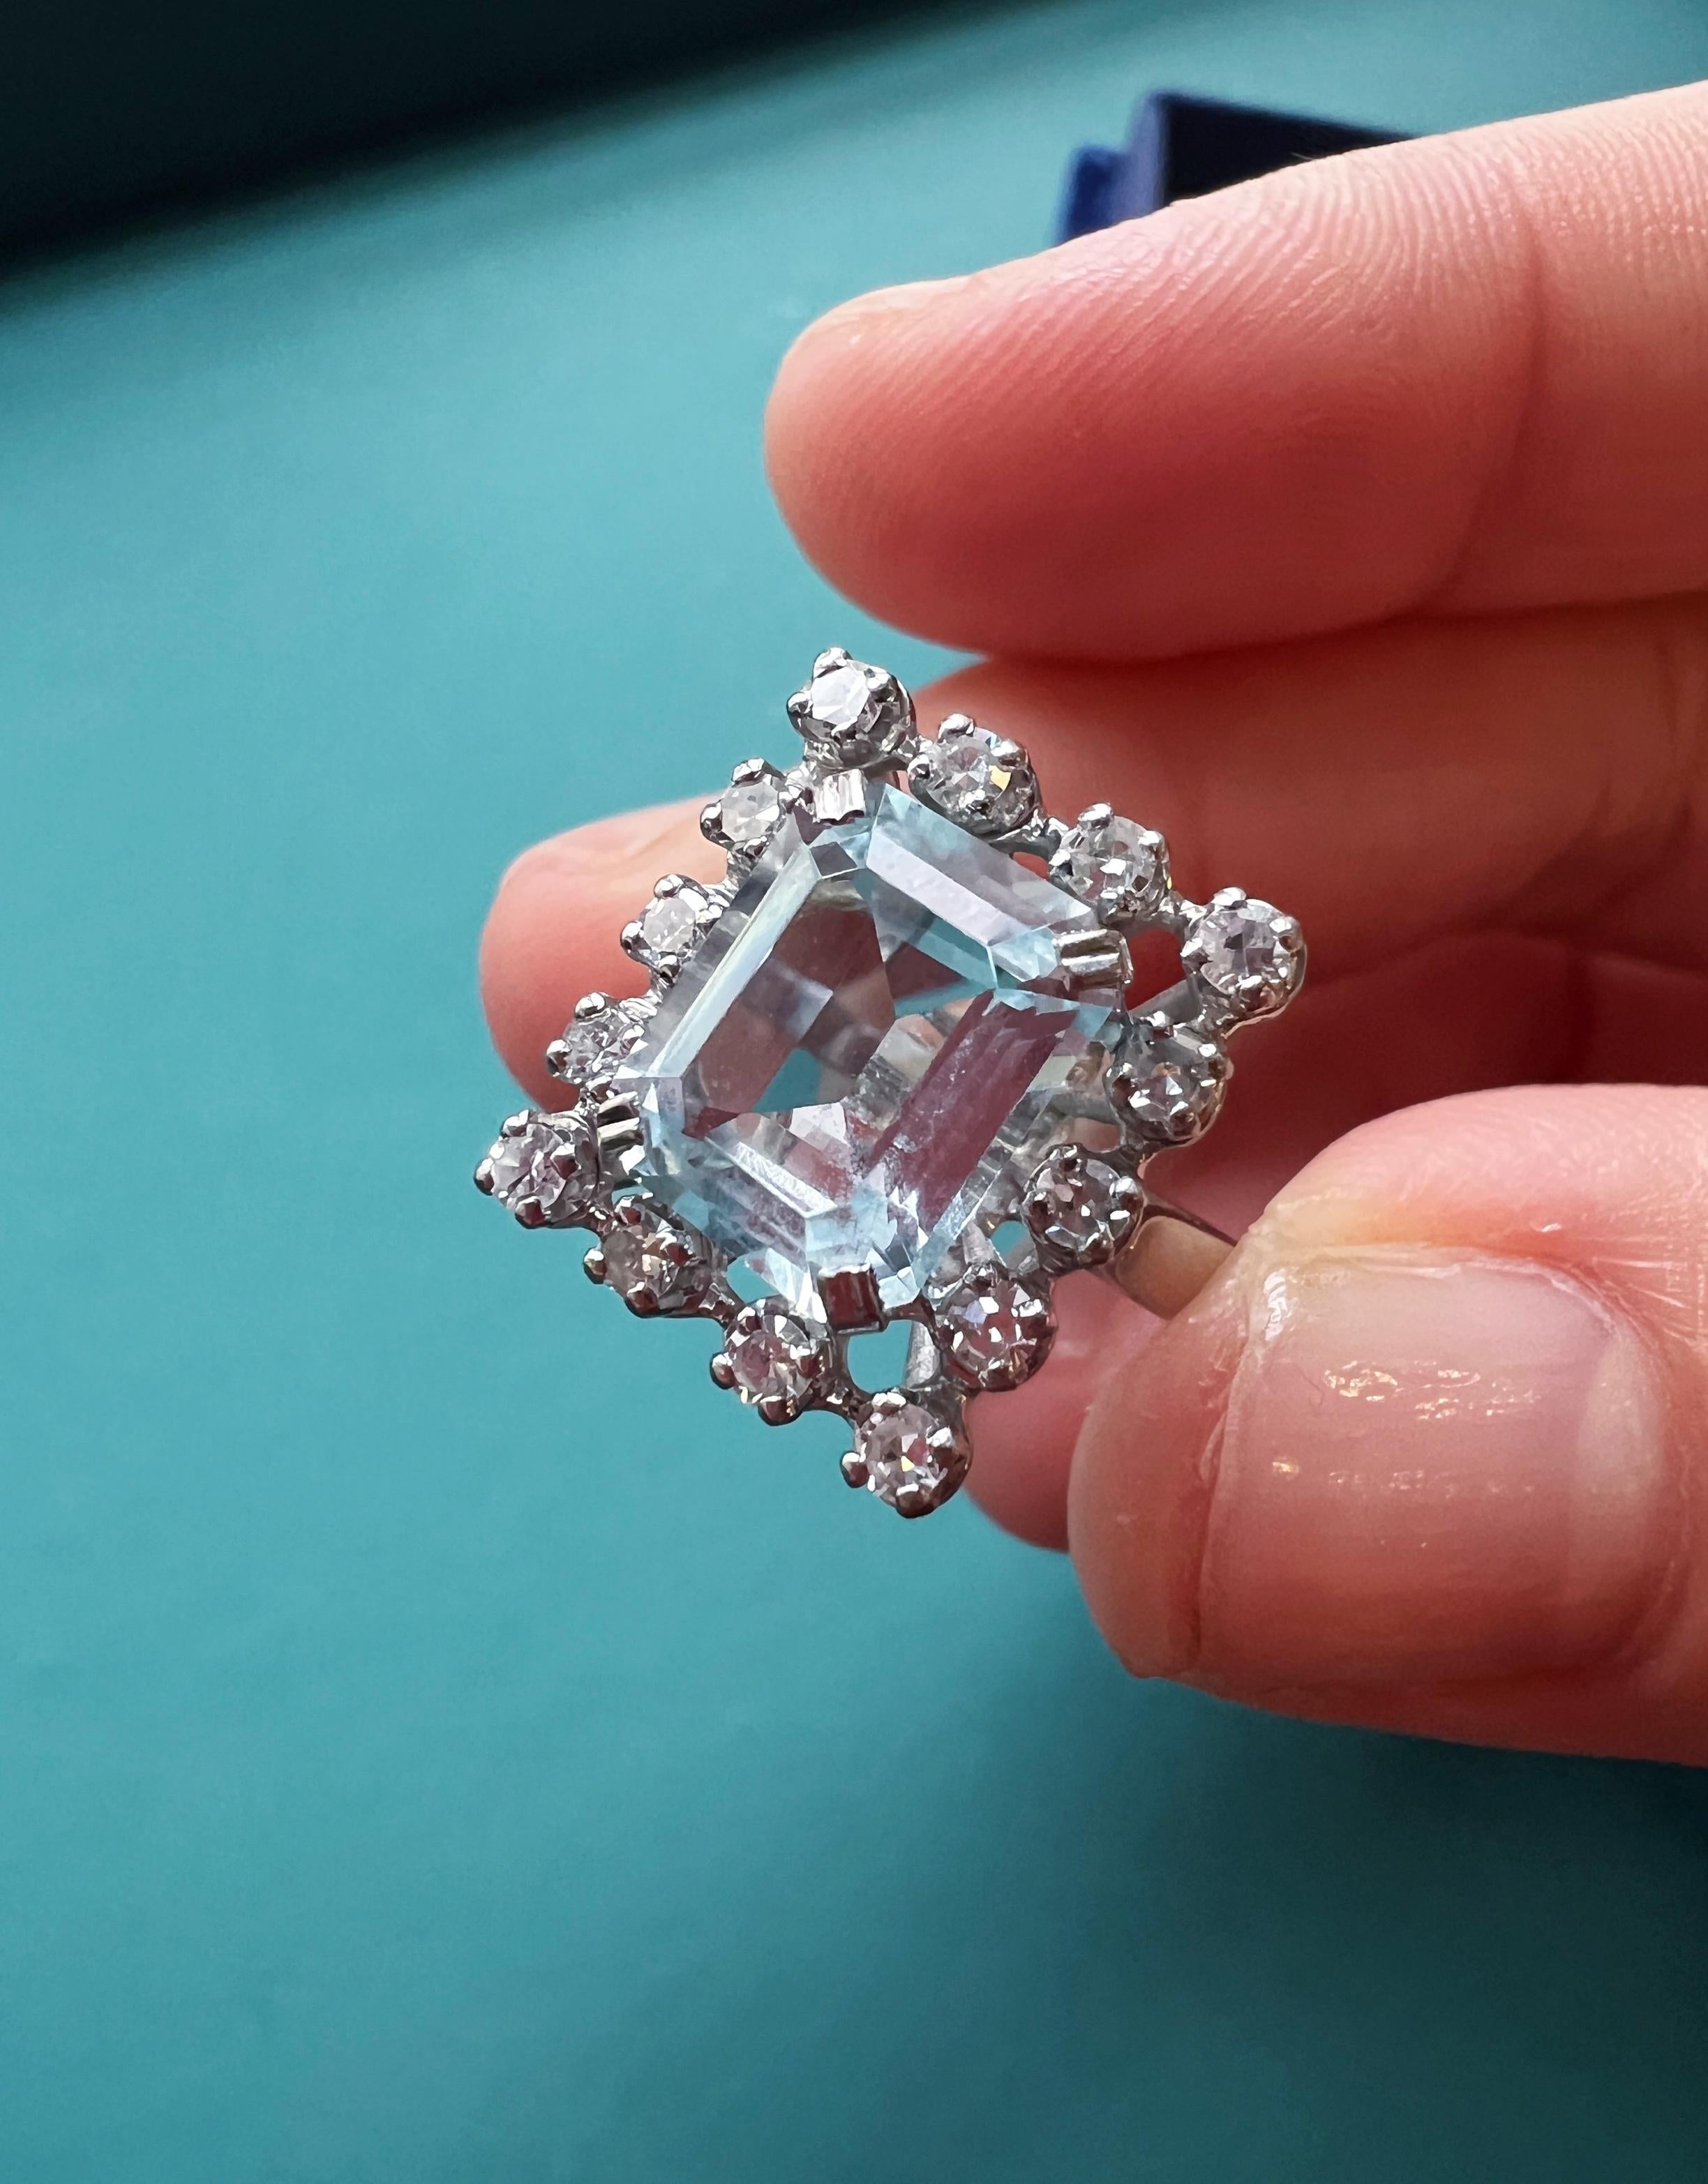 For sale a beautiful French work, aquamarine and diamond cocktail ring in cluster setting style.

The central eye-clean aquamarine is emerald cut and prong set. It conveys the famous pastel, cooling blue color of the aquamarine and it weights